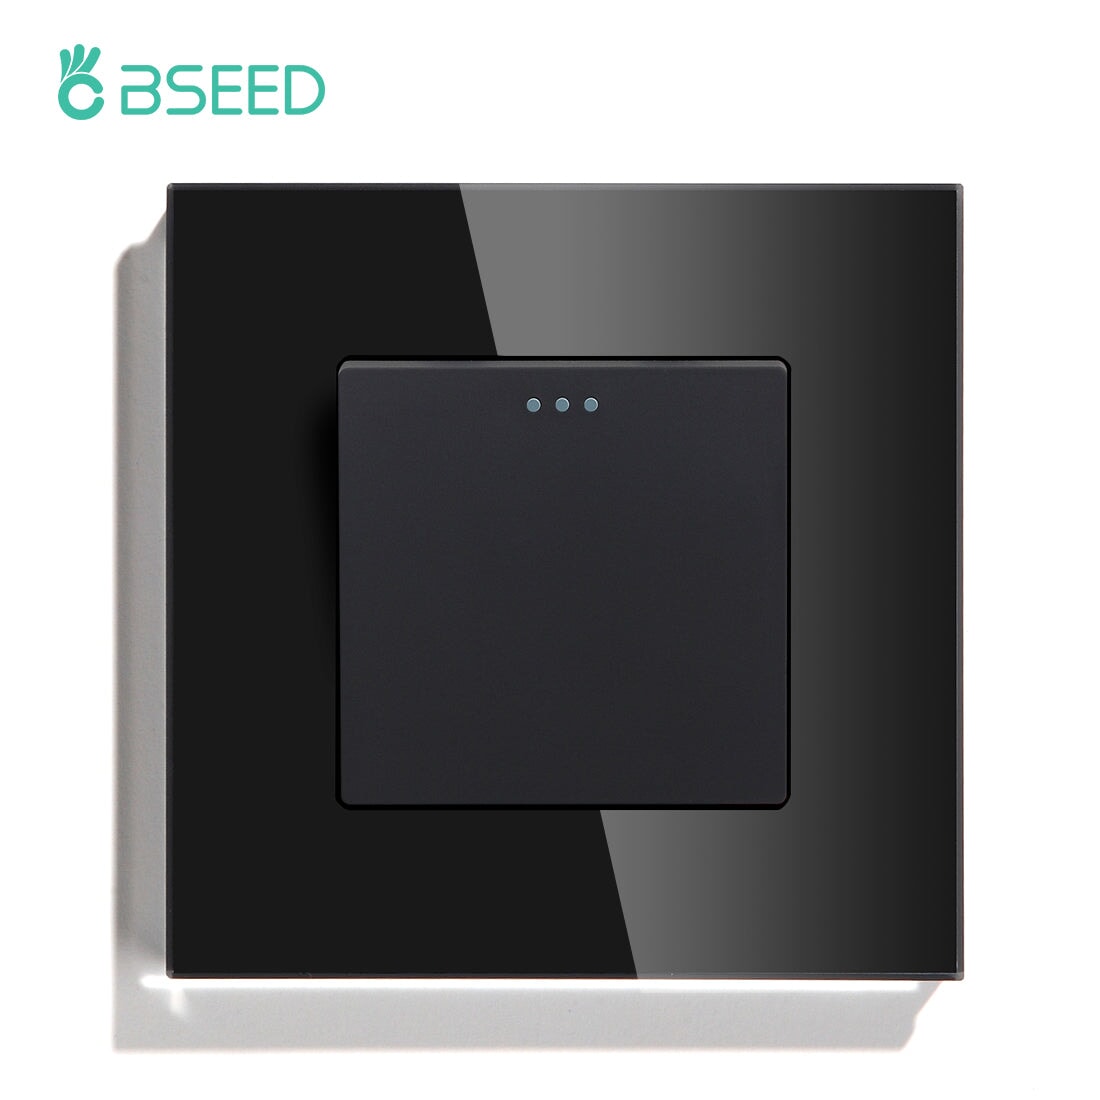 BSEED Wall Switches Automatic Rebound 1/2Gang 1Way Glass Mechanical Light Switches Reset Switches Return to Initial Position Light Switches Bseedswitch Black 1Gang 